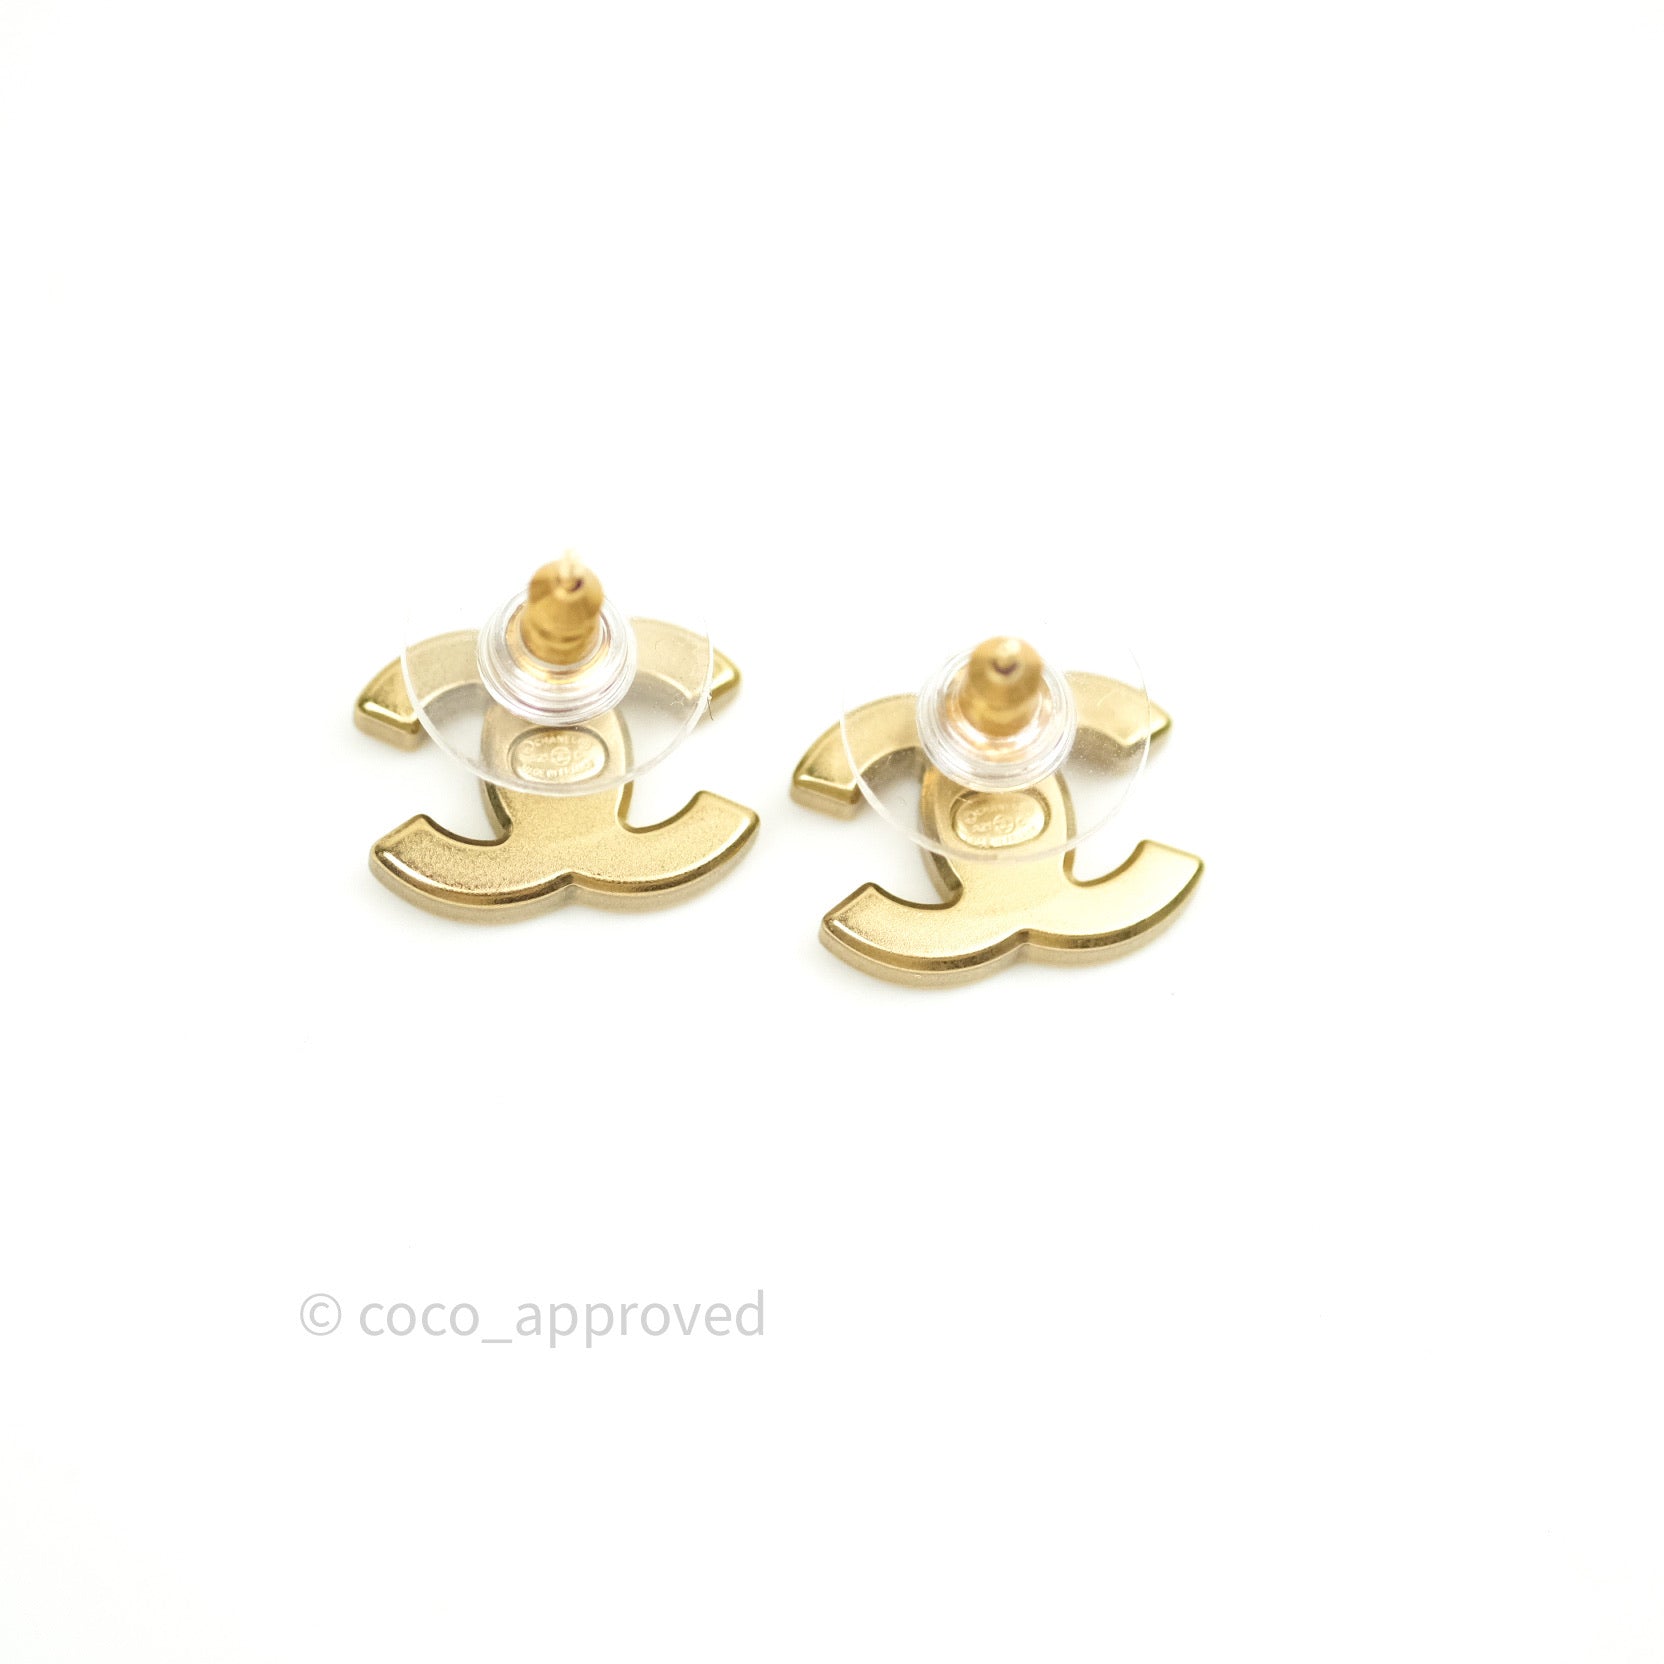 Chanel Crystal CC Earrings Gold Tone – Coco Approved Studio